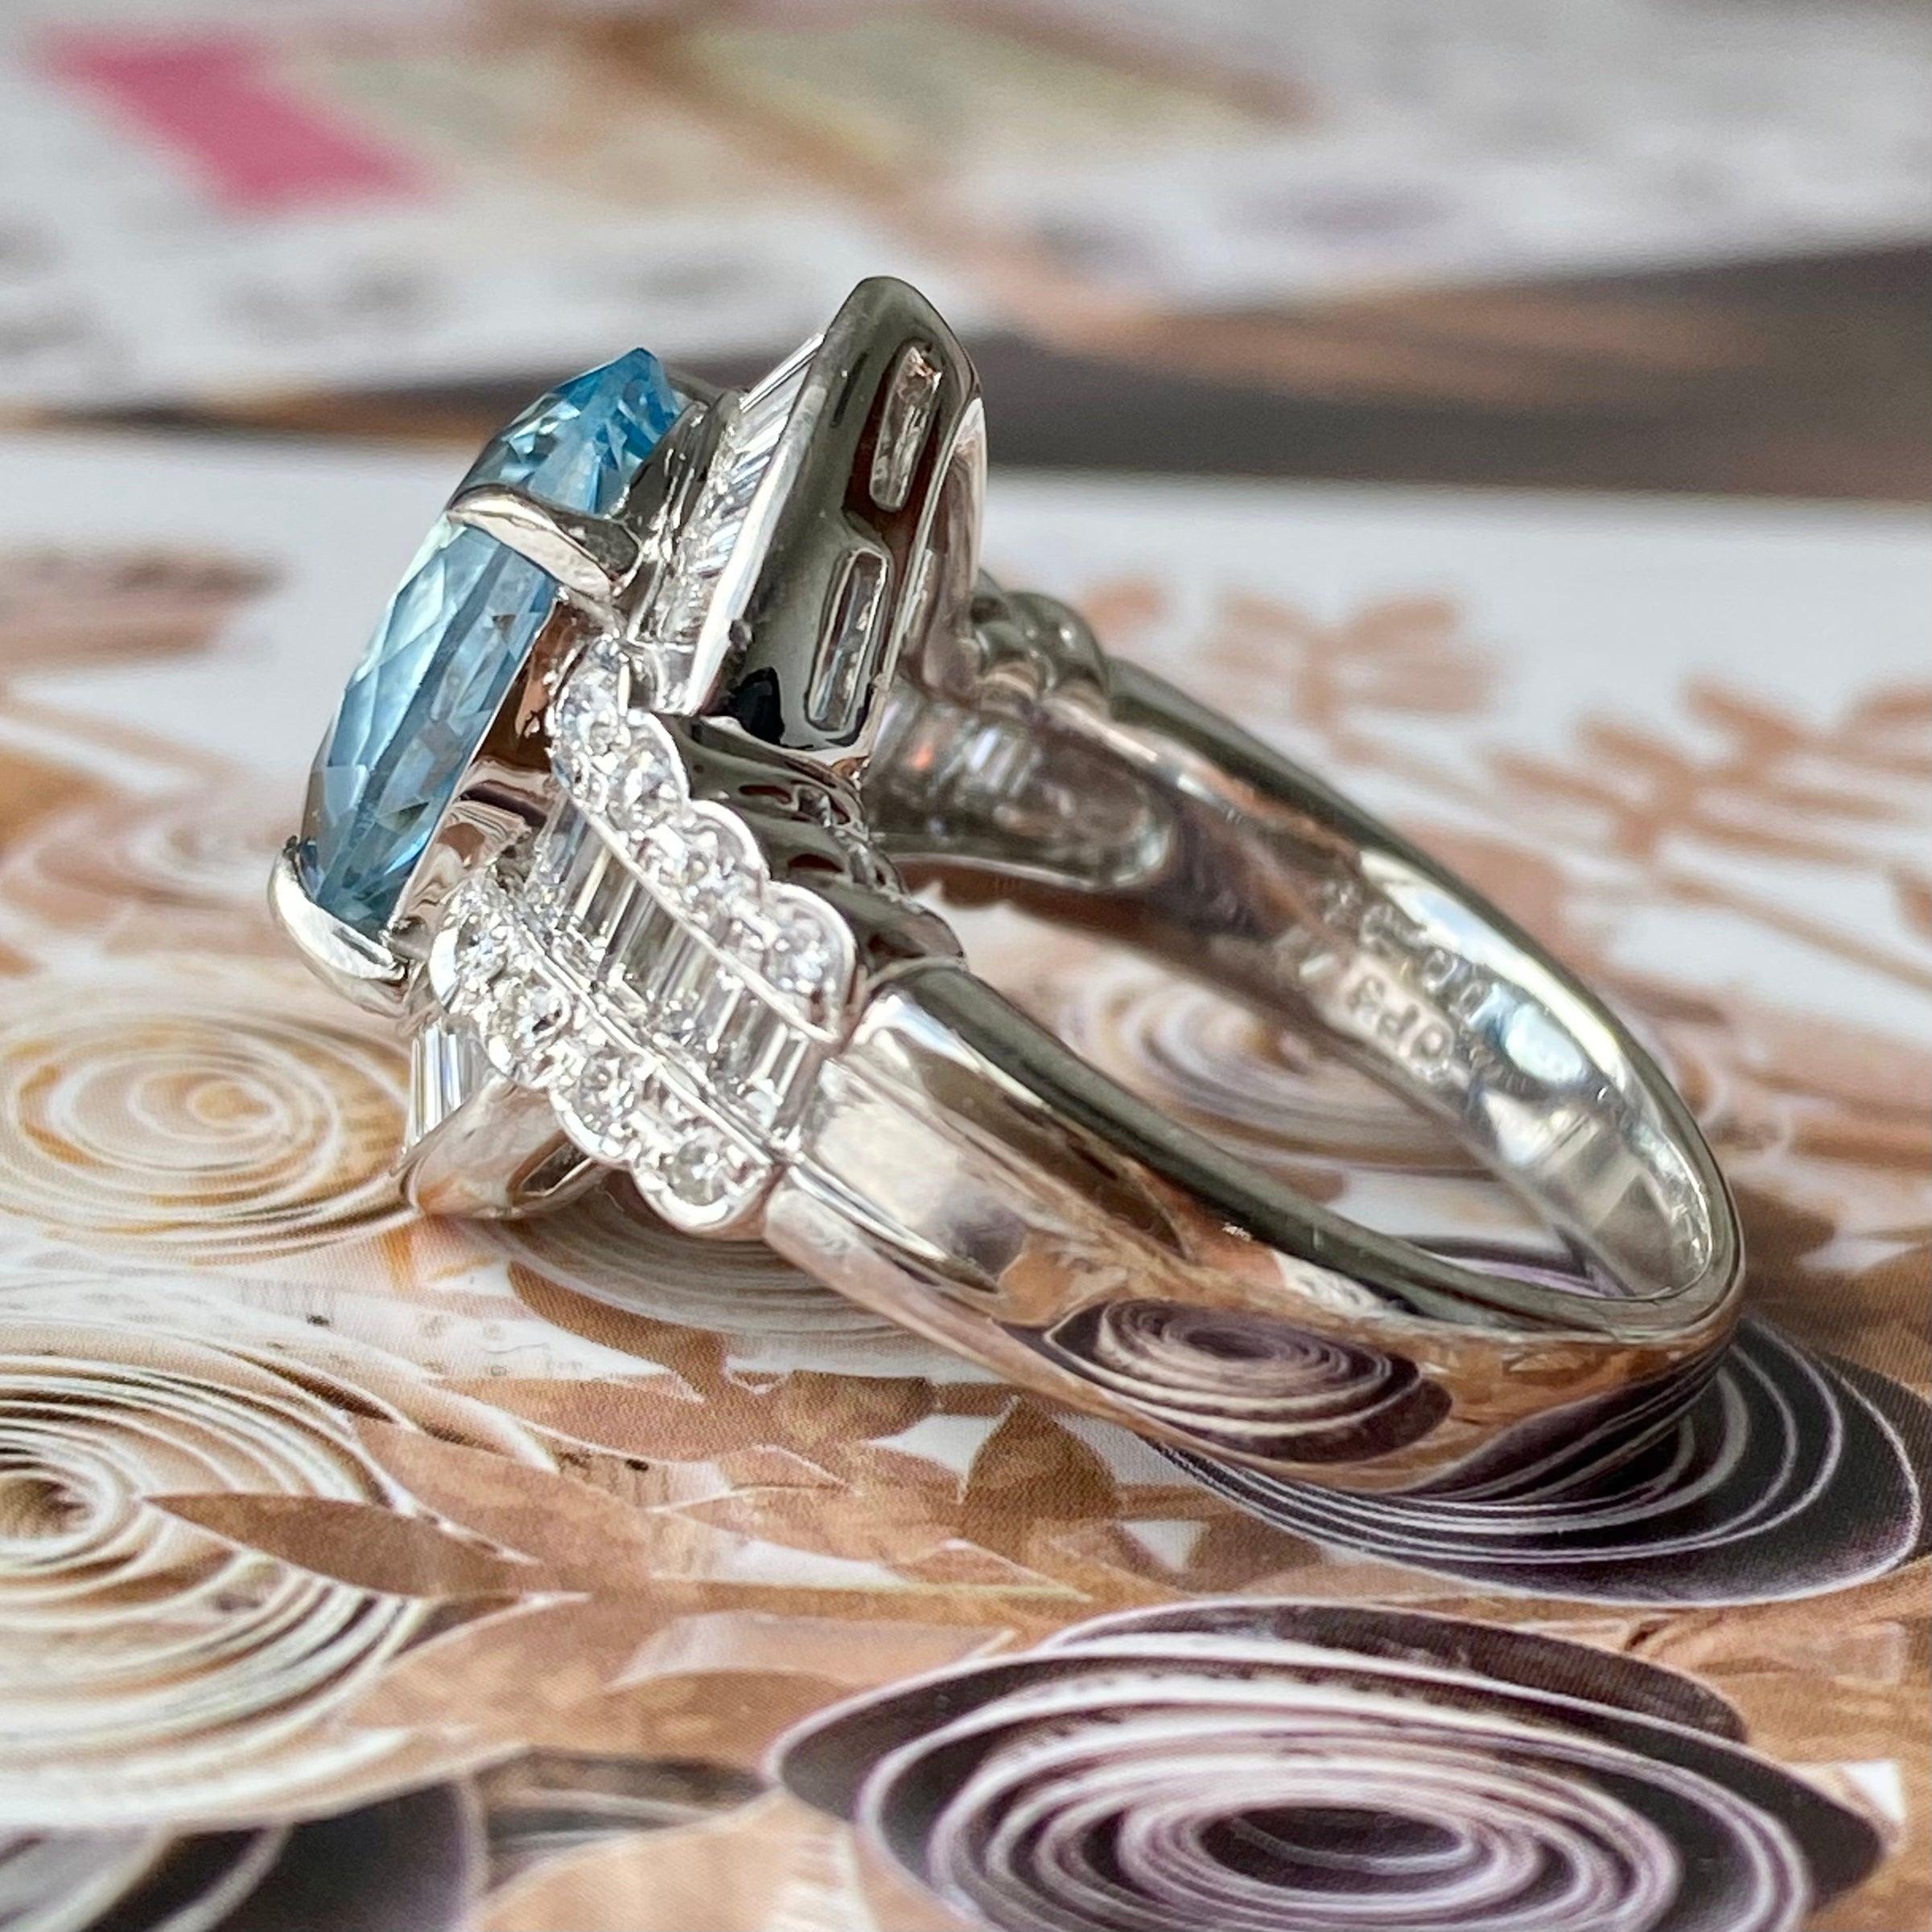 Crafted in platinum, the ring features an oval cut aquamarine surrounded by baguette and round cut diamonds in an elegant low profile setting.
Aquamarine: 4.0 carat
Diamonds: 0.95ctw. Color: G-H, Clarity: VS1-SI1
Measurements:
Front width: 18.5